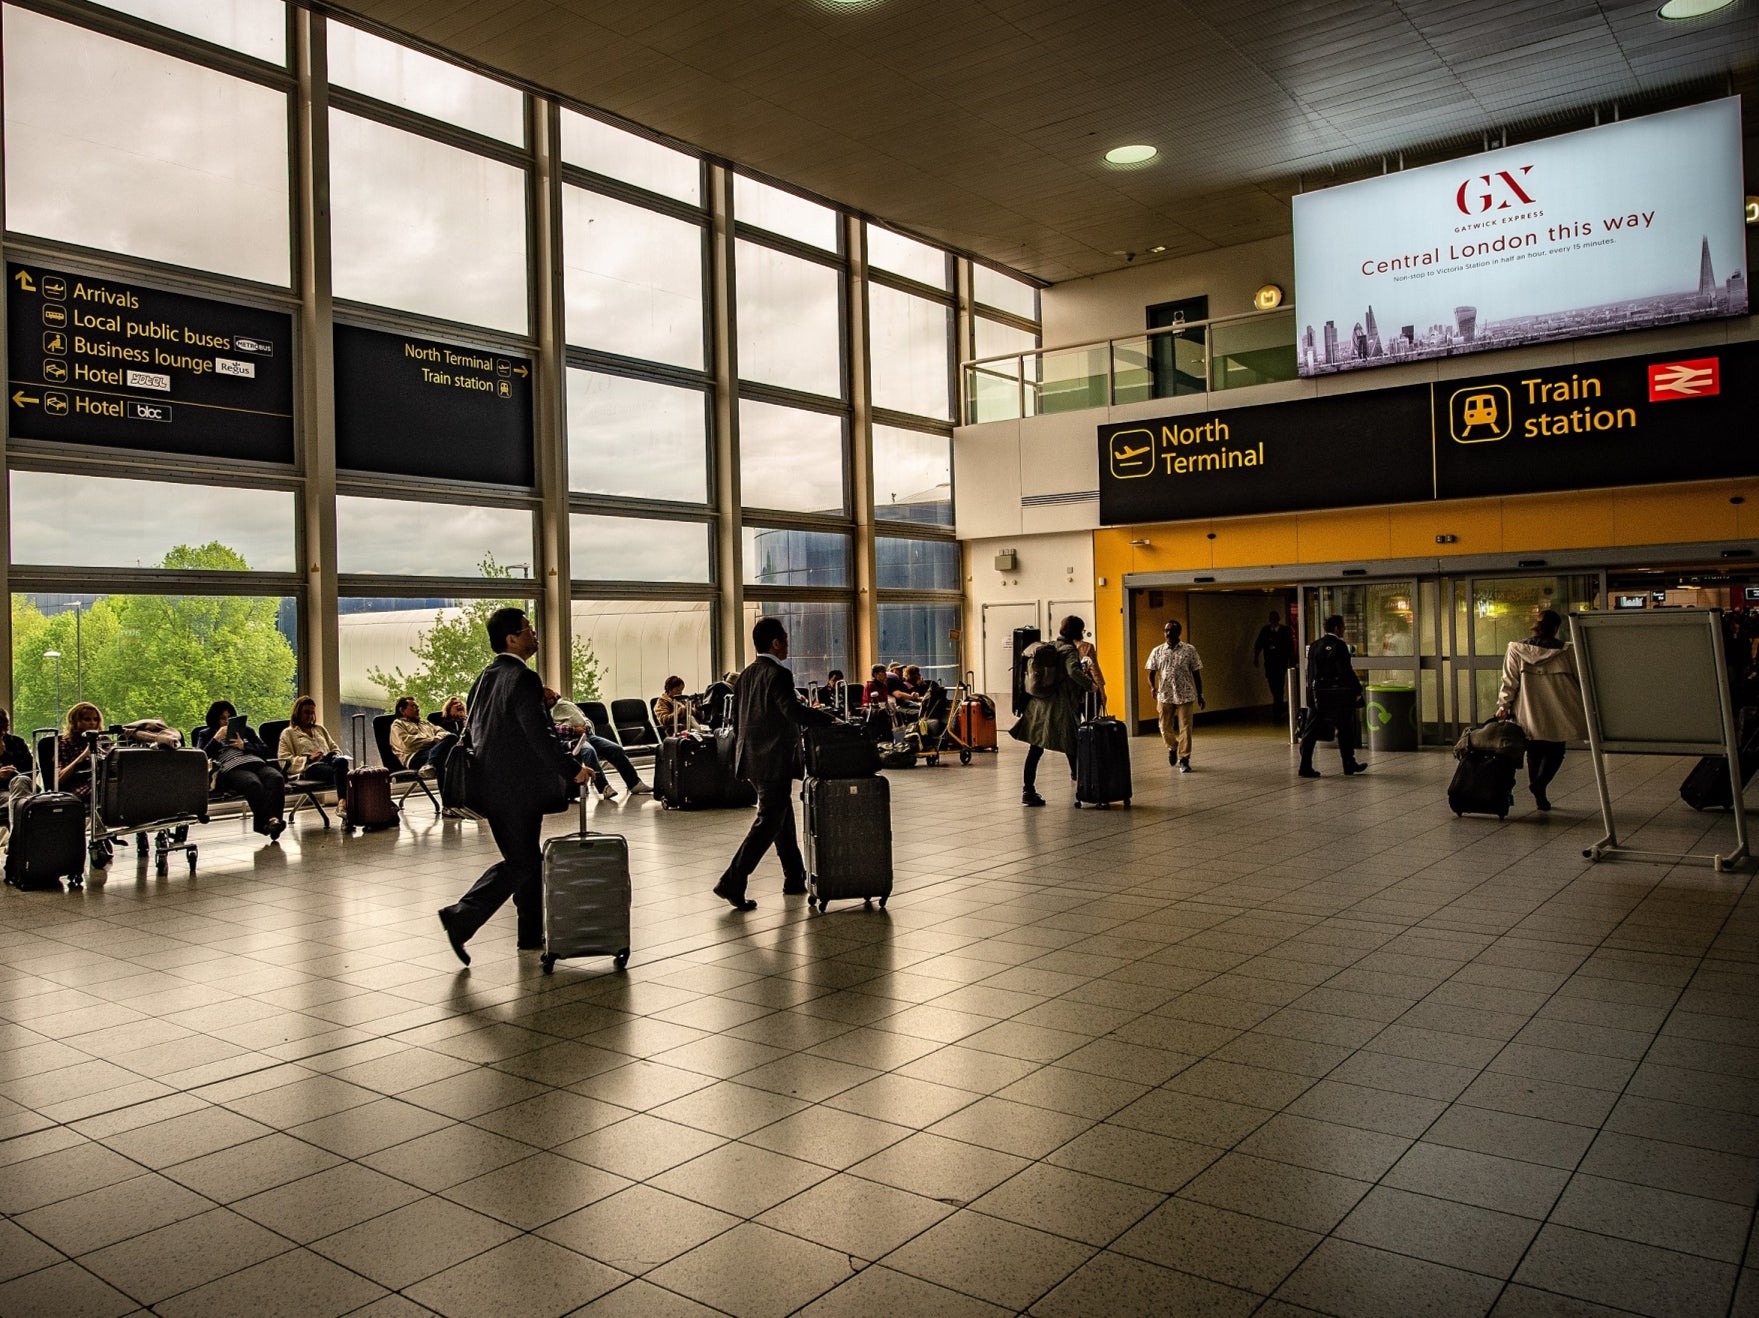 South bound: the revived terminal at Gatwick airport